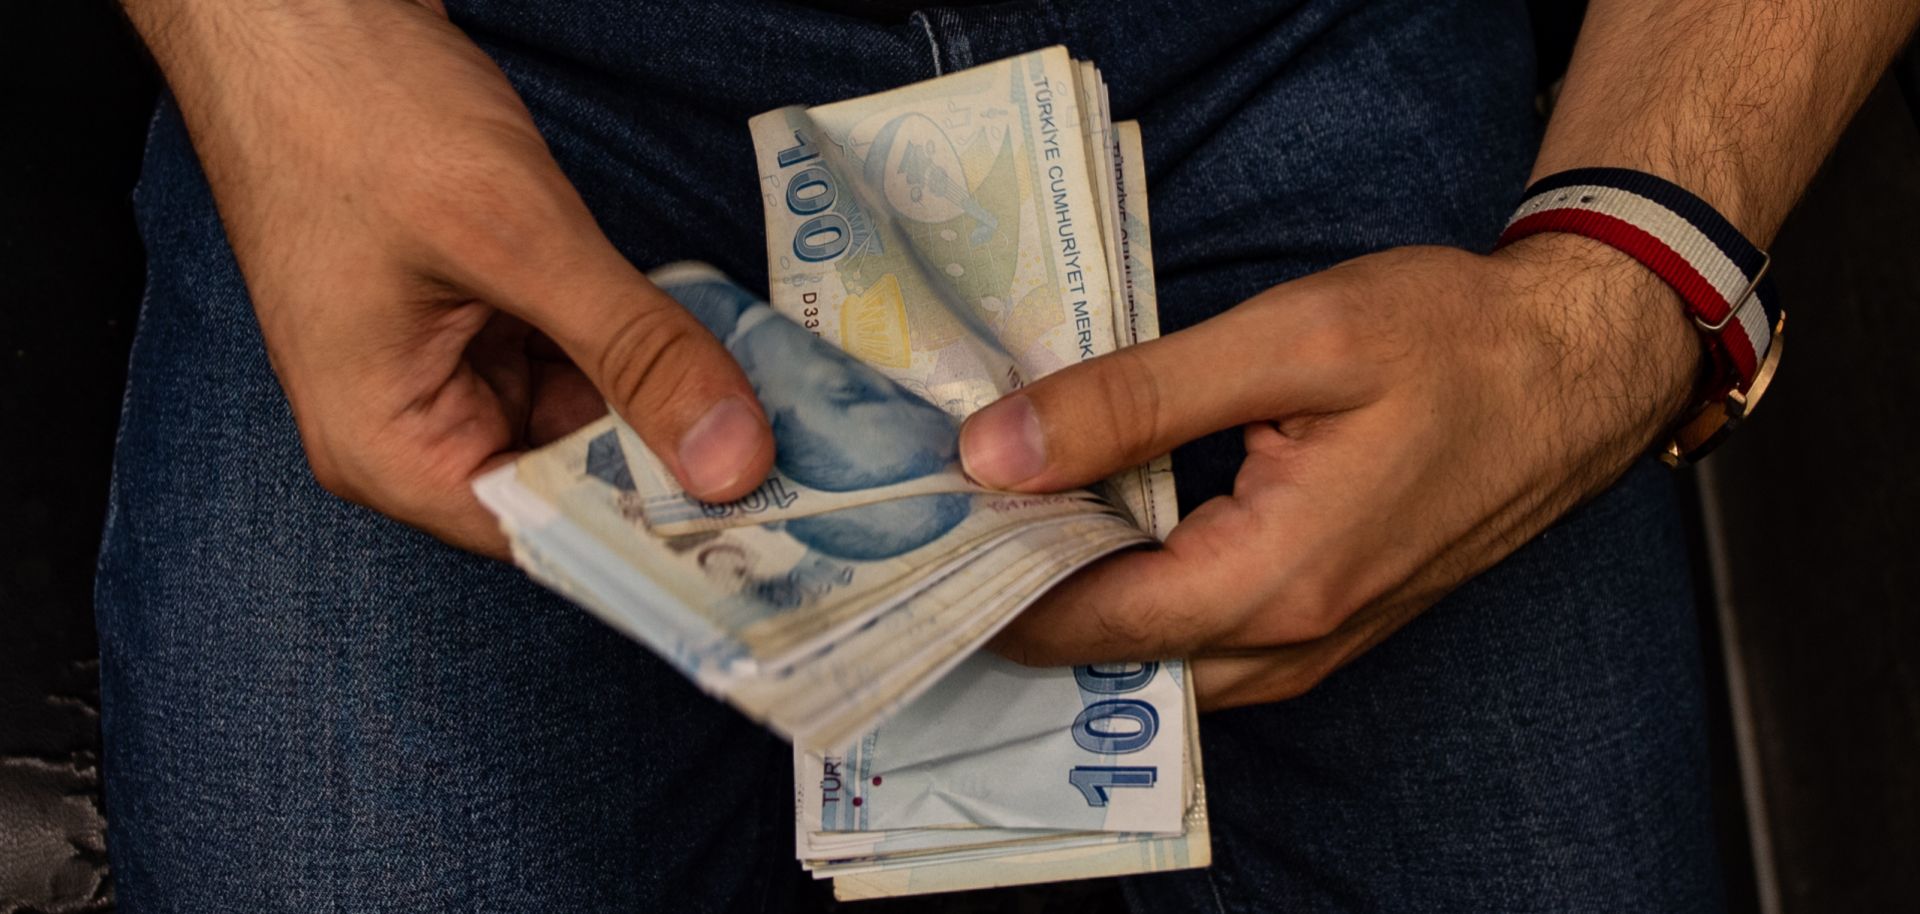 A currency exchange worker counts lira banknotes in Istanbul, Turkey, on Aug. 6, 2020.